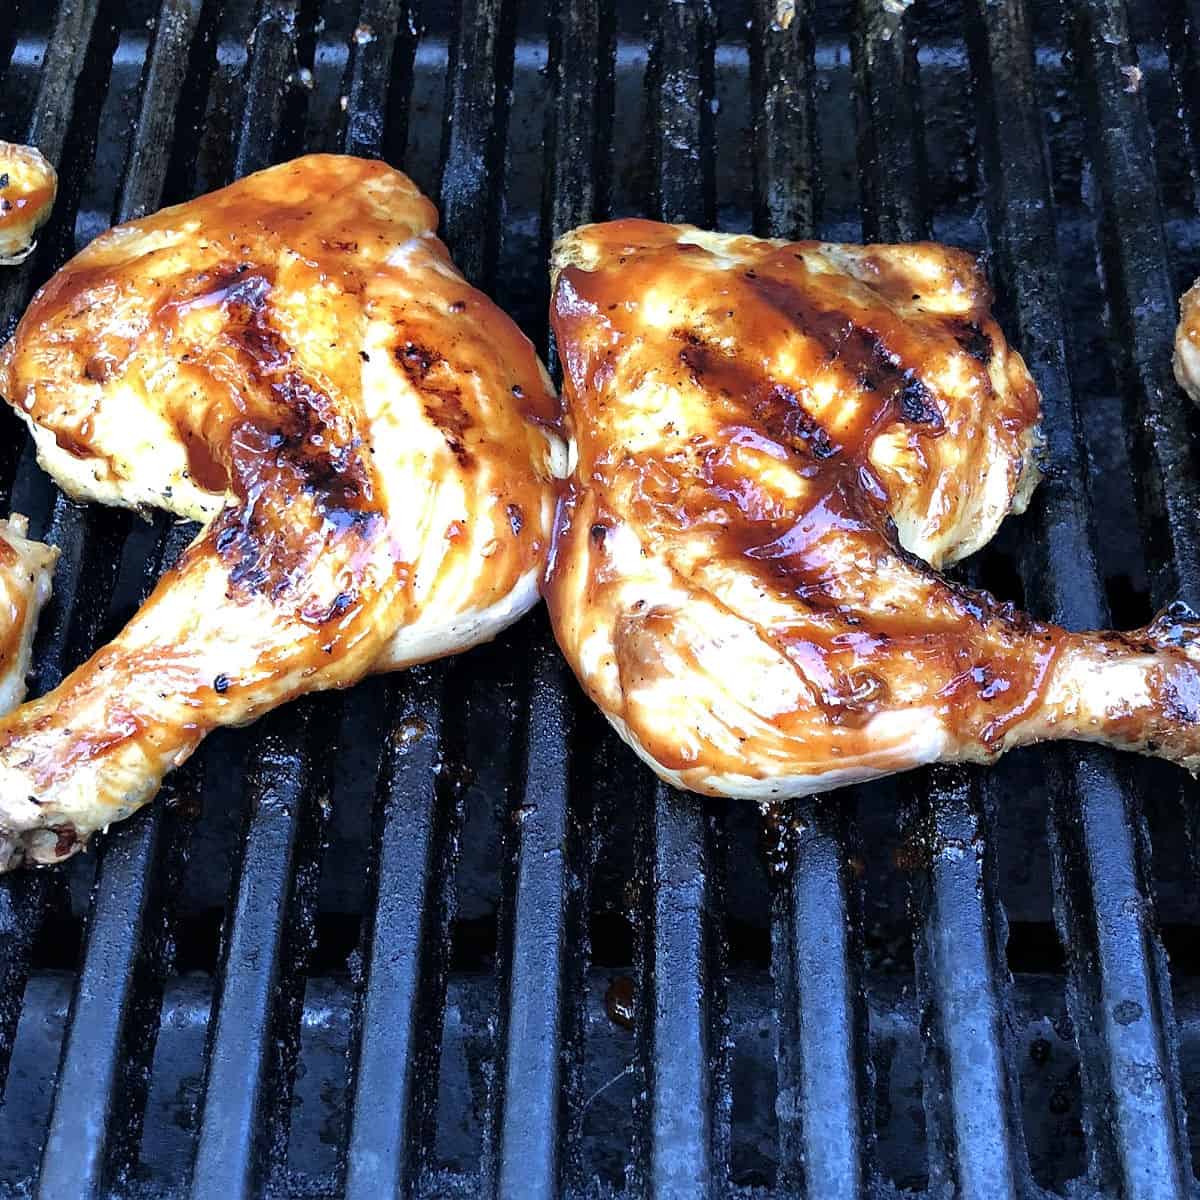 Chicken Legs on the Grill - Quarters, Drumsticks & Thighs